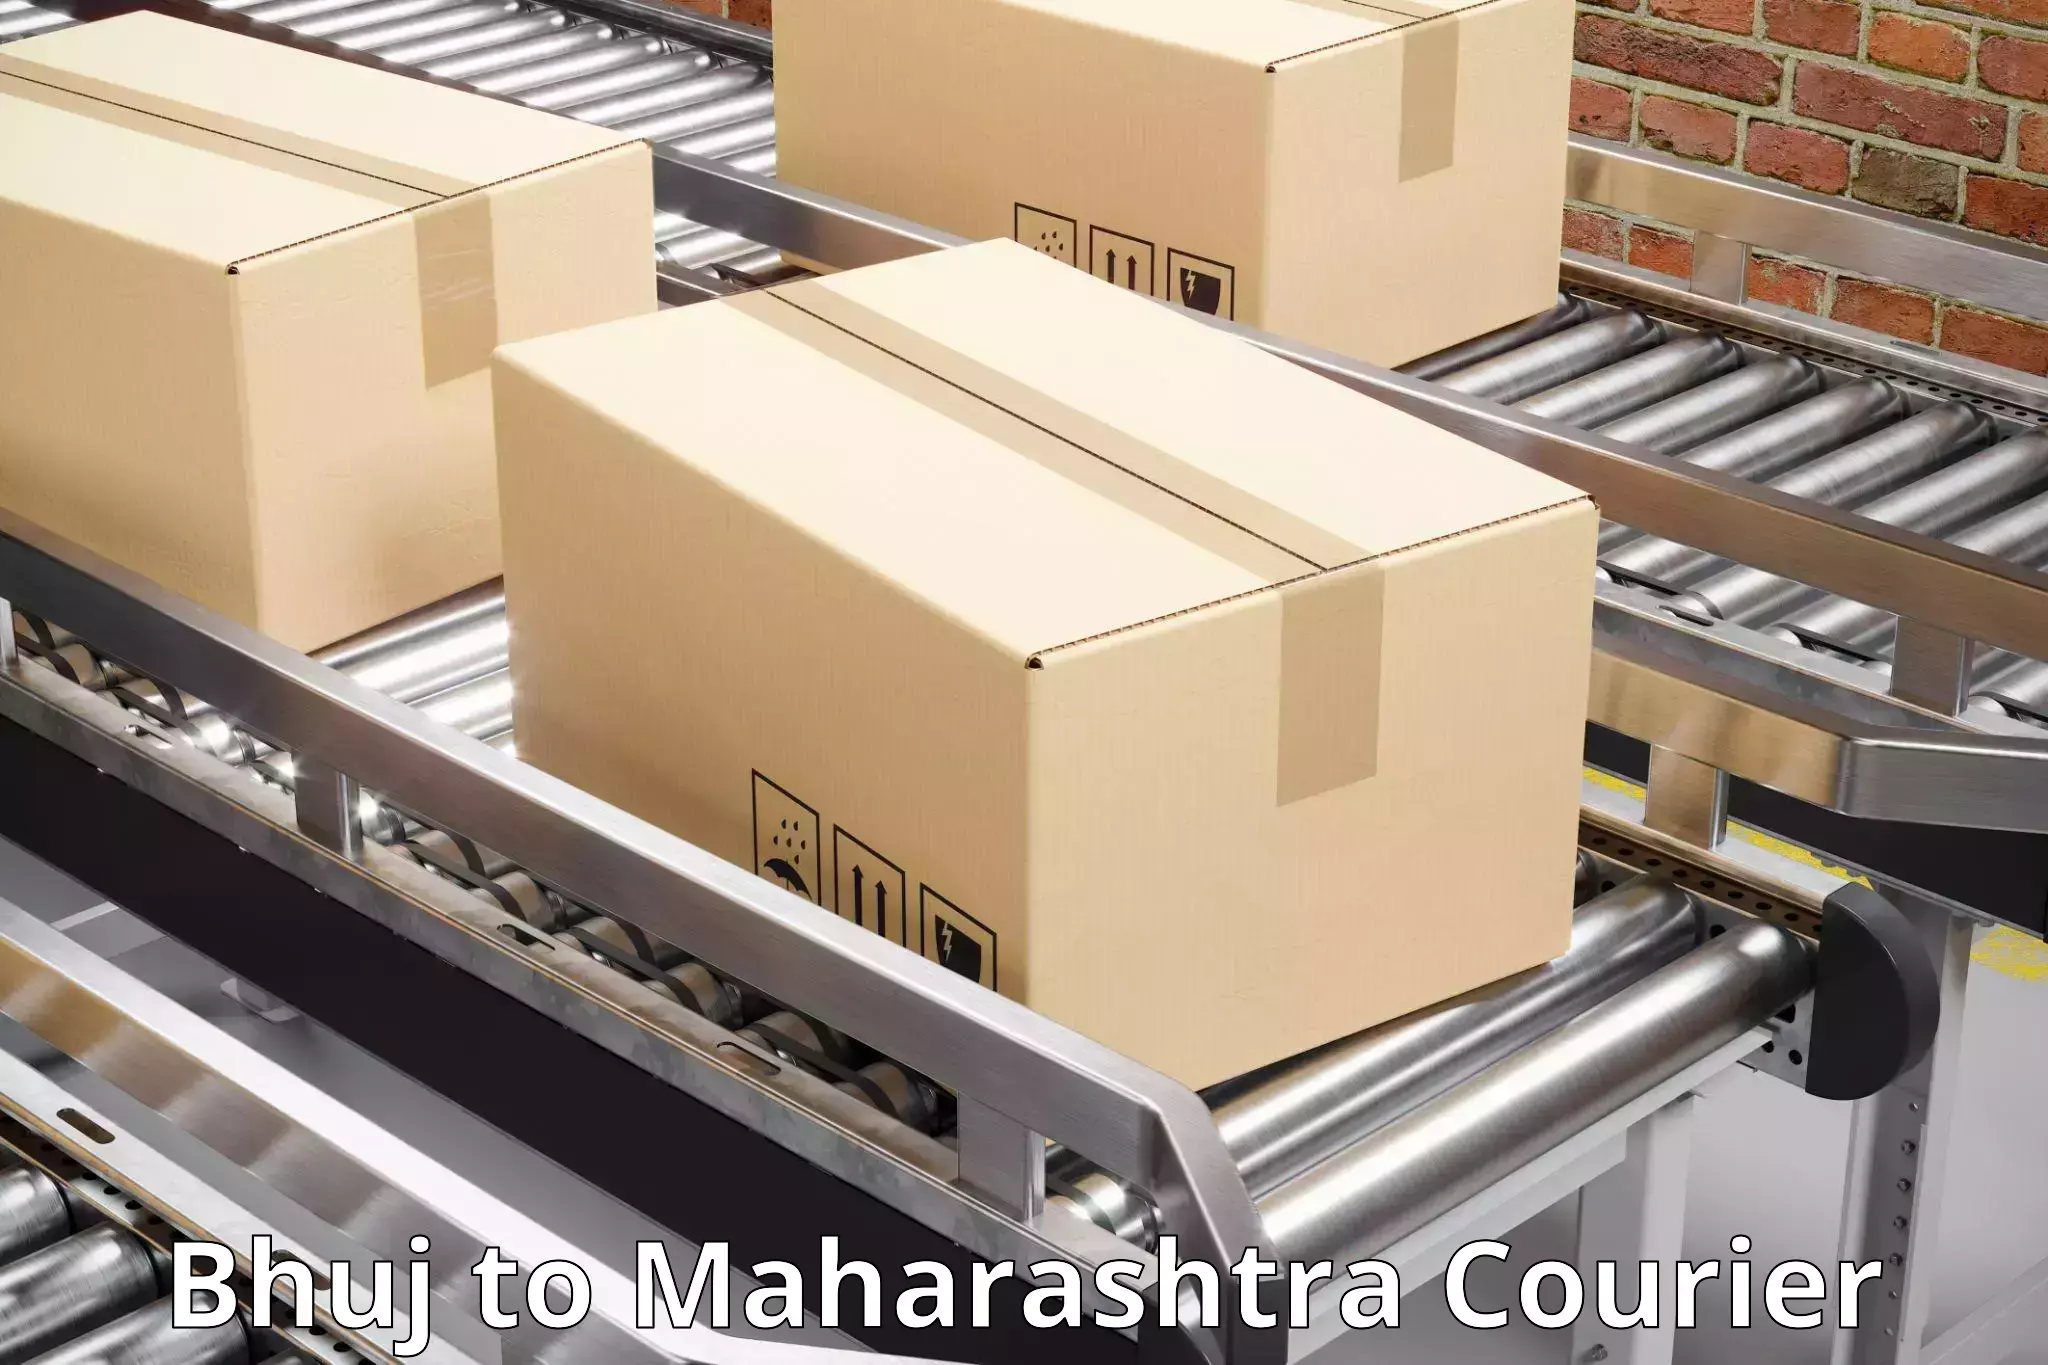 State-of-the-art courier technology Bhuj to Lonere